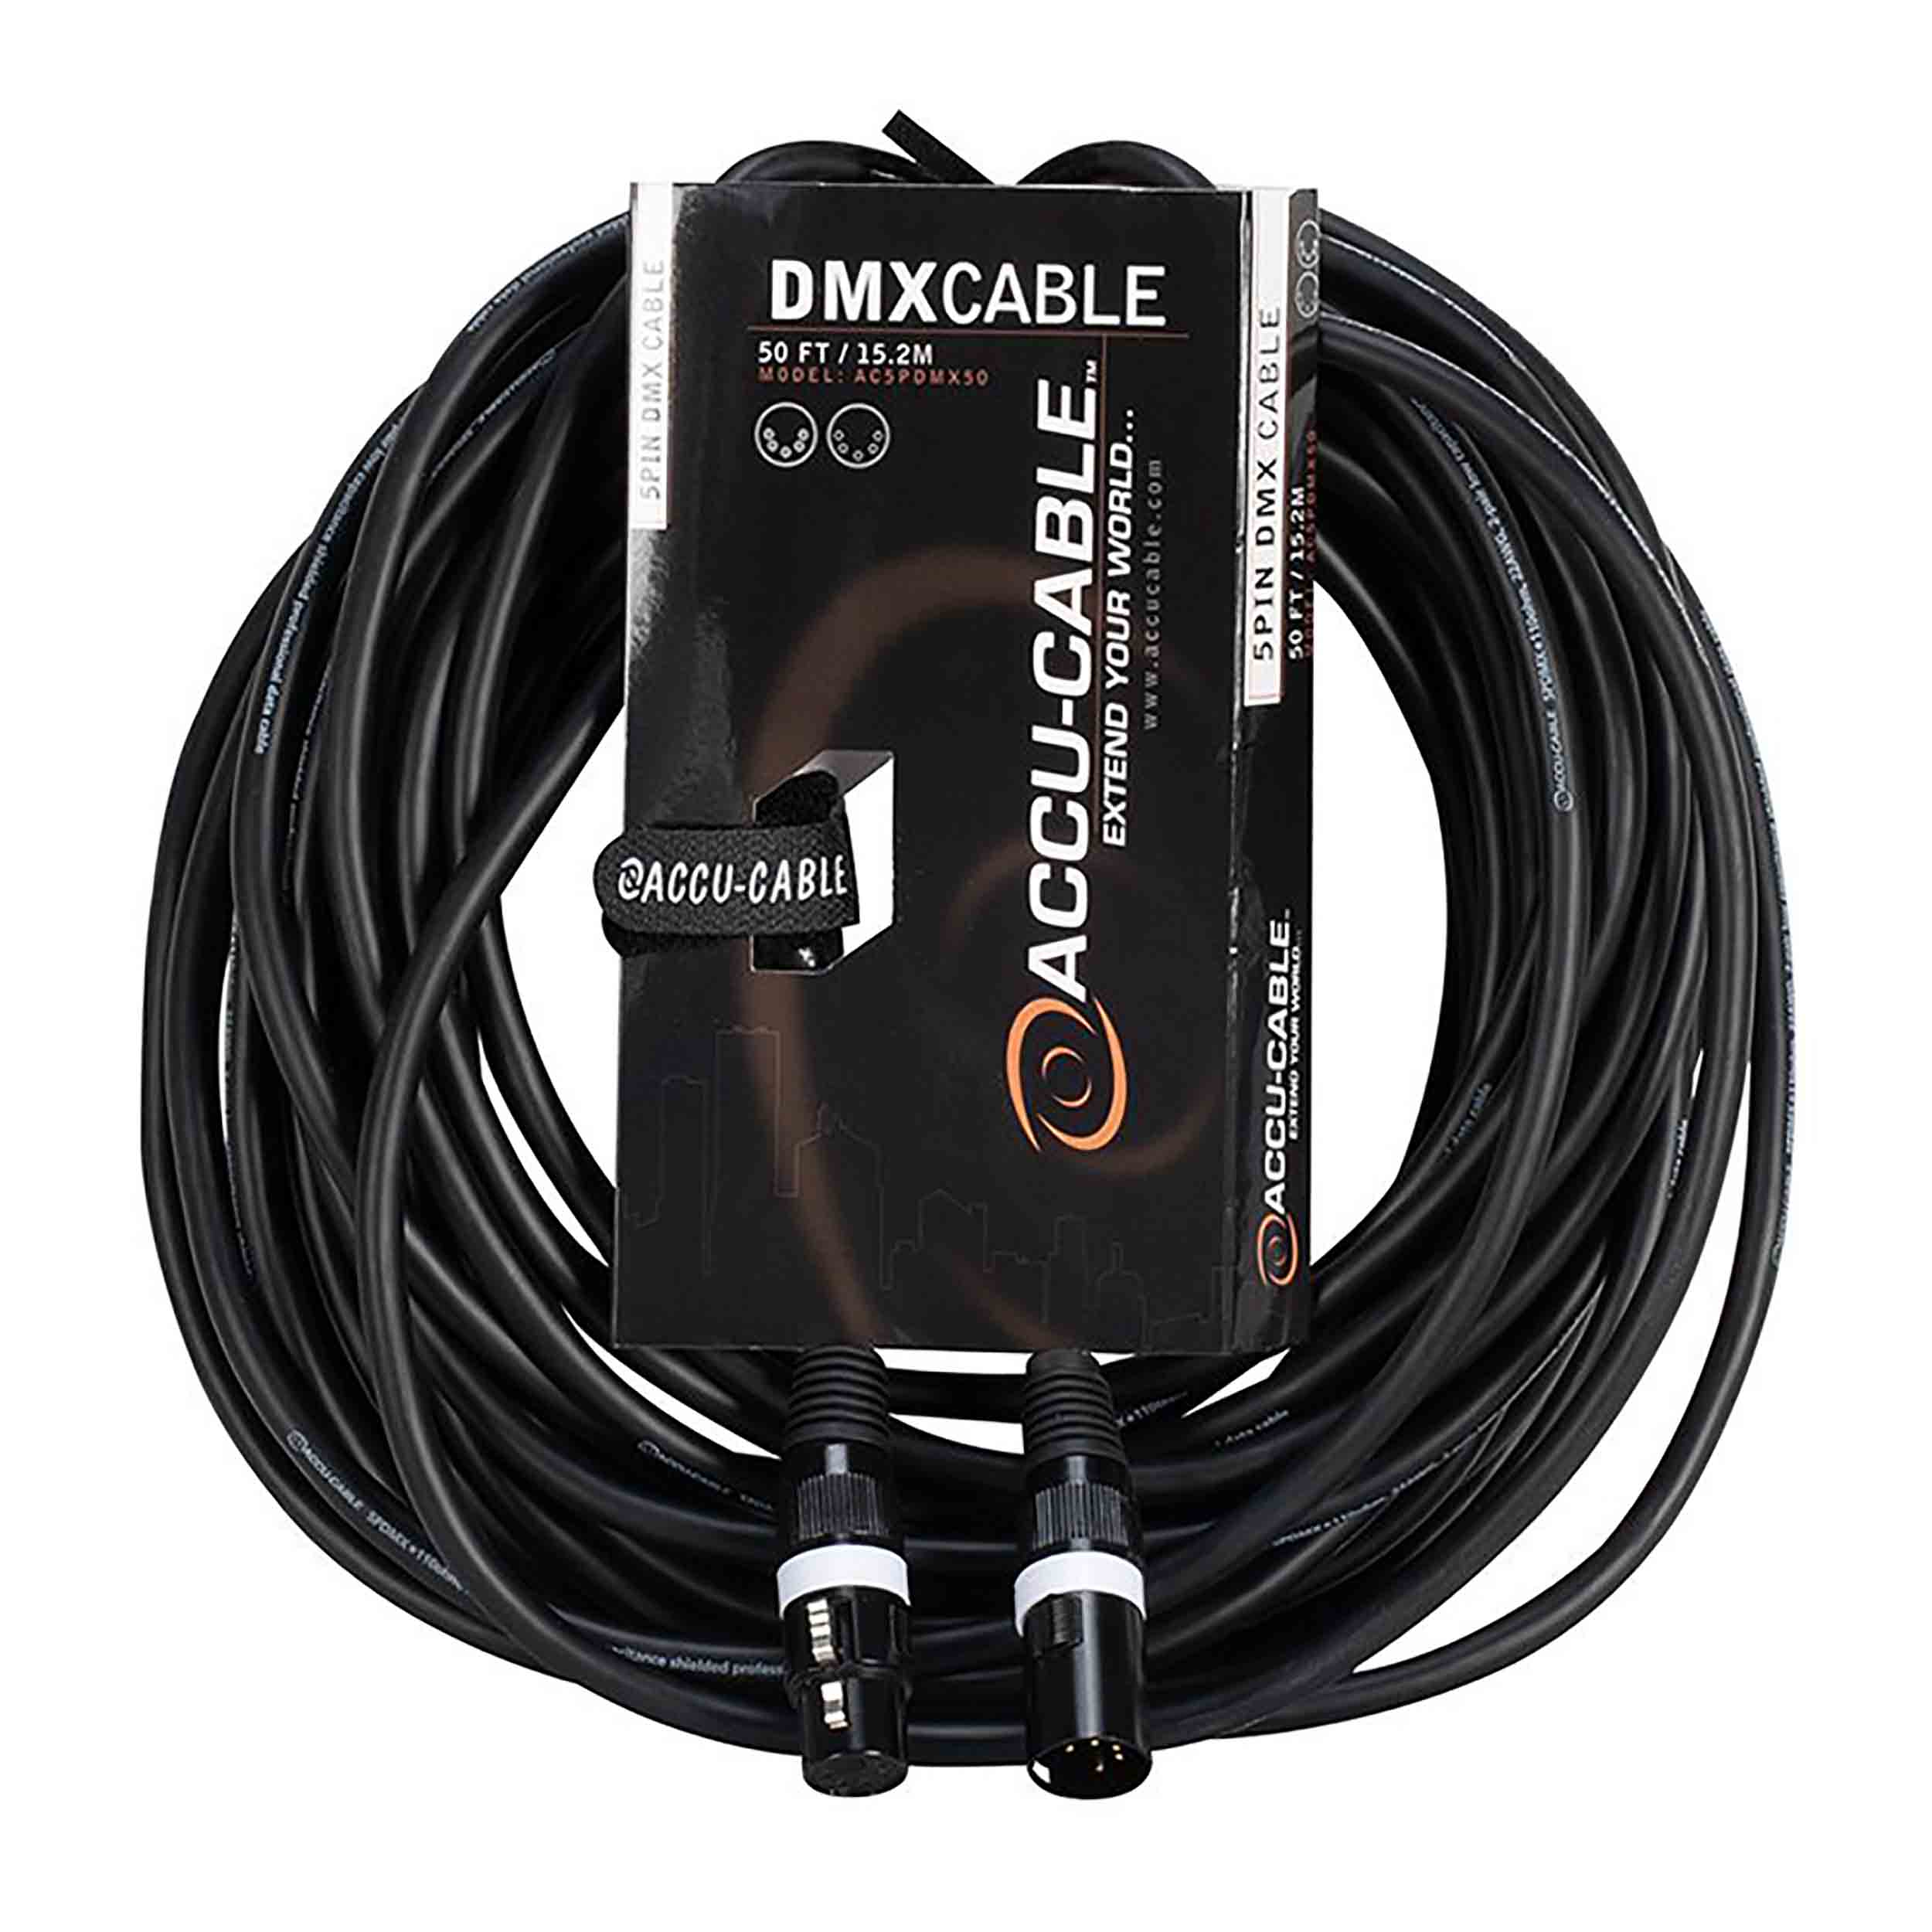 Accu-Cable AC5PDMX50, 5-Pin Male to 5-Pin Female Connection DMX Cable - 50 Ft by Accu Cable